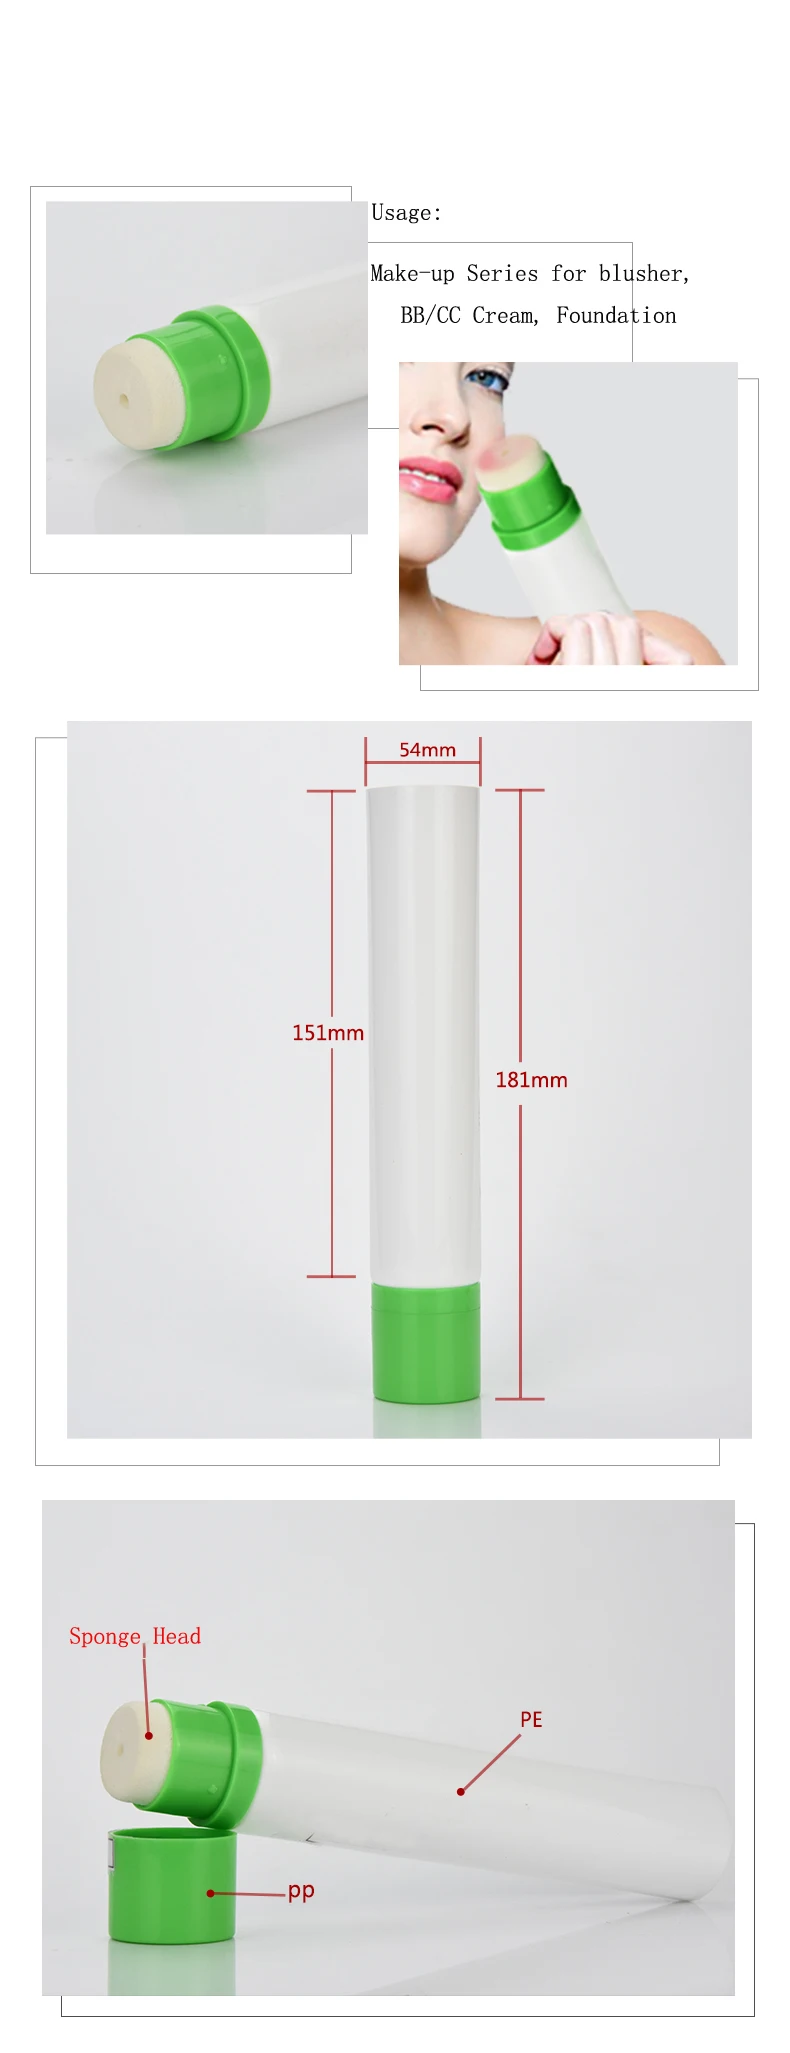 suppliers in china  bpa free plastic makeup package foundation stick container bb cream tube with a sponge head